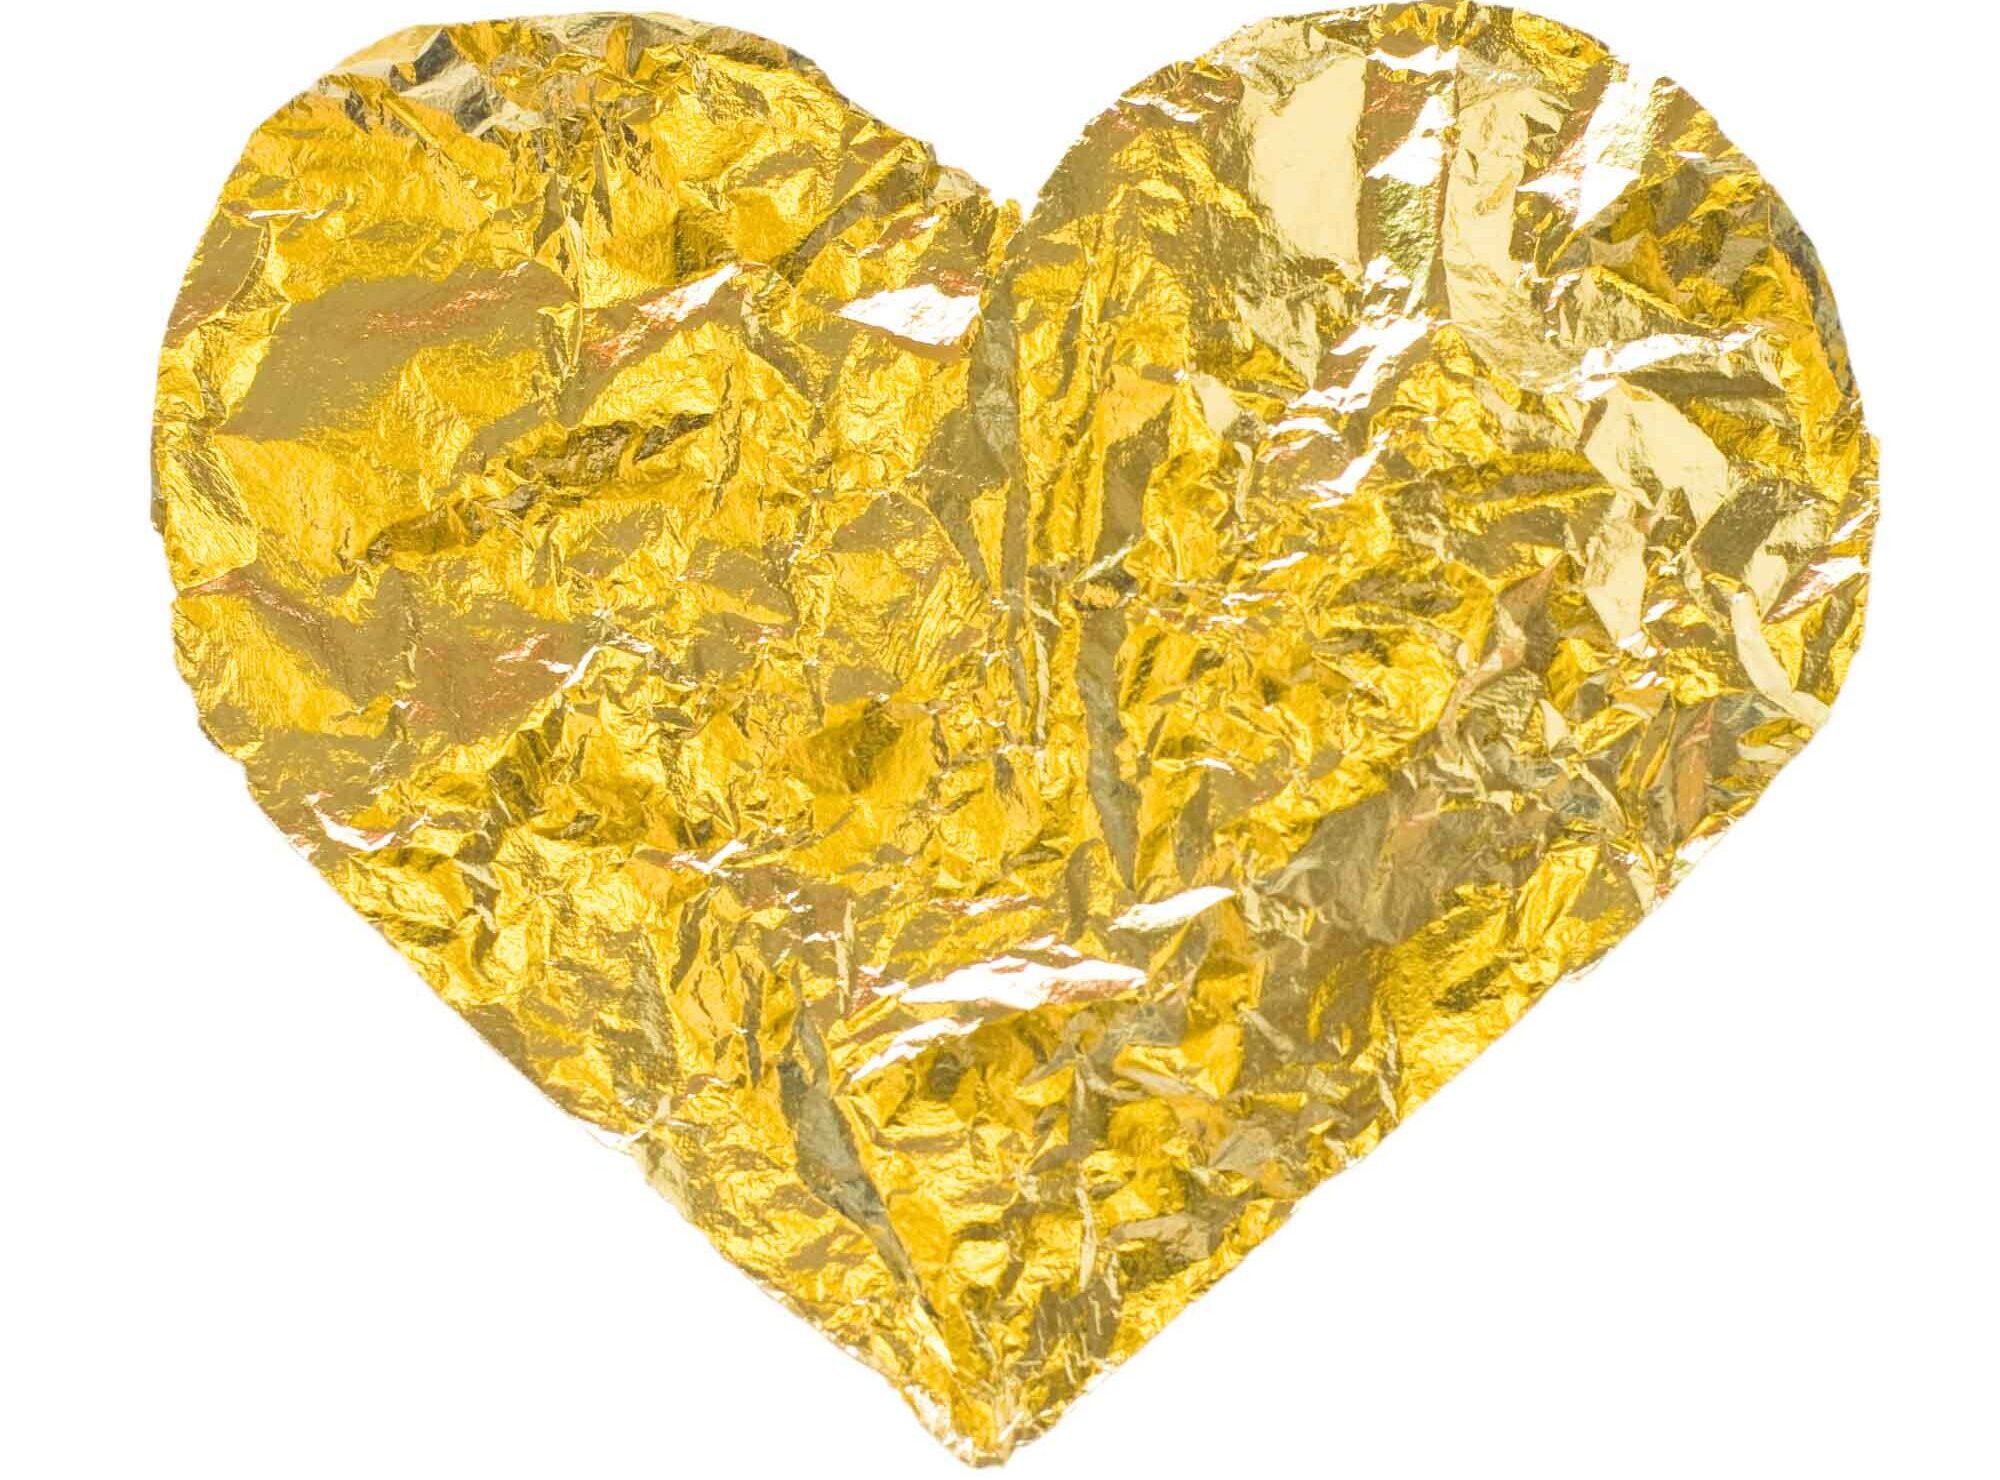 The Golden Nugget is the key to getting over heartbreak.